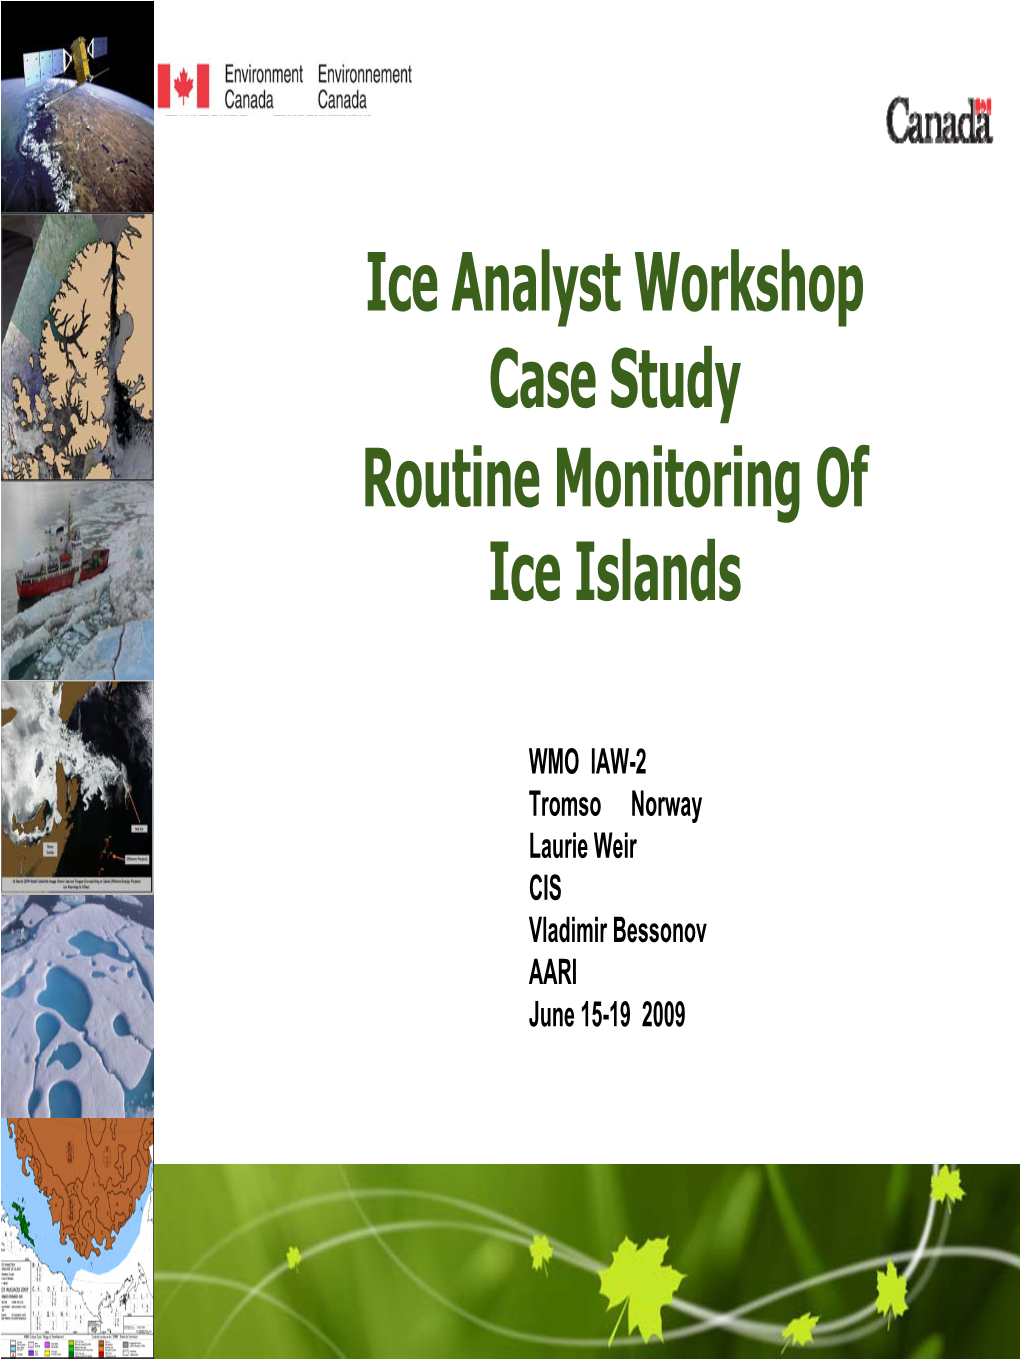 Routine Monitoring of Ice Islands